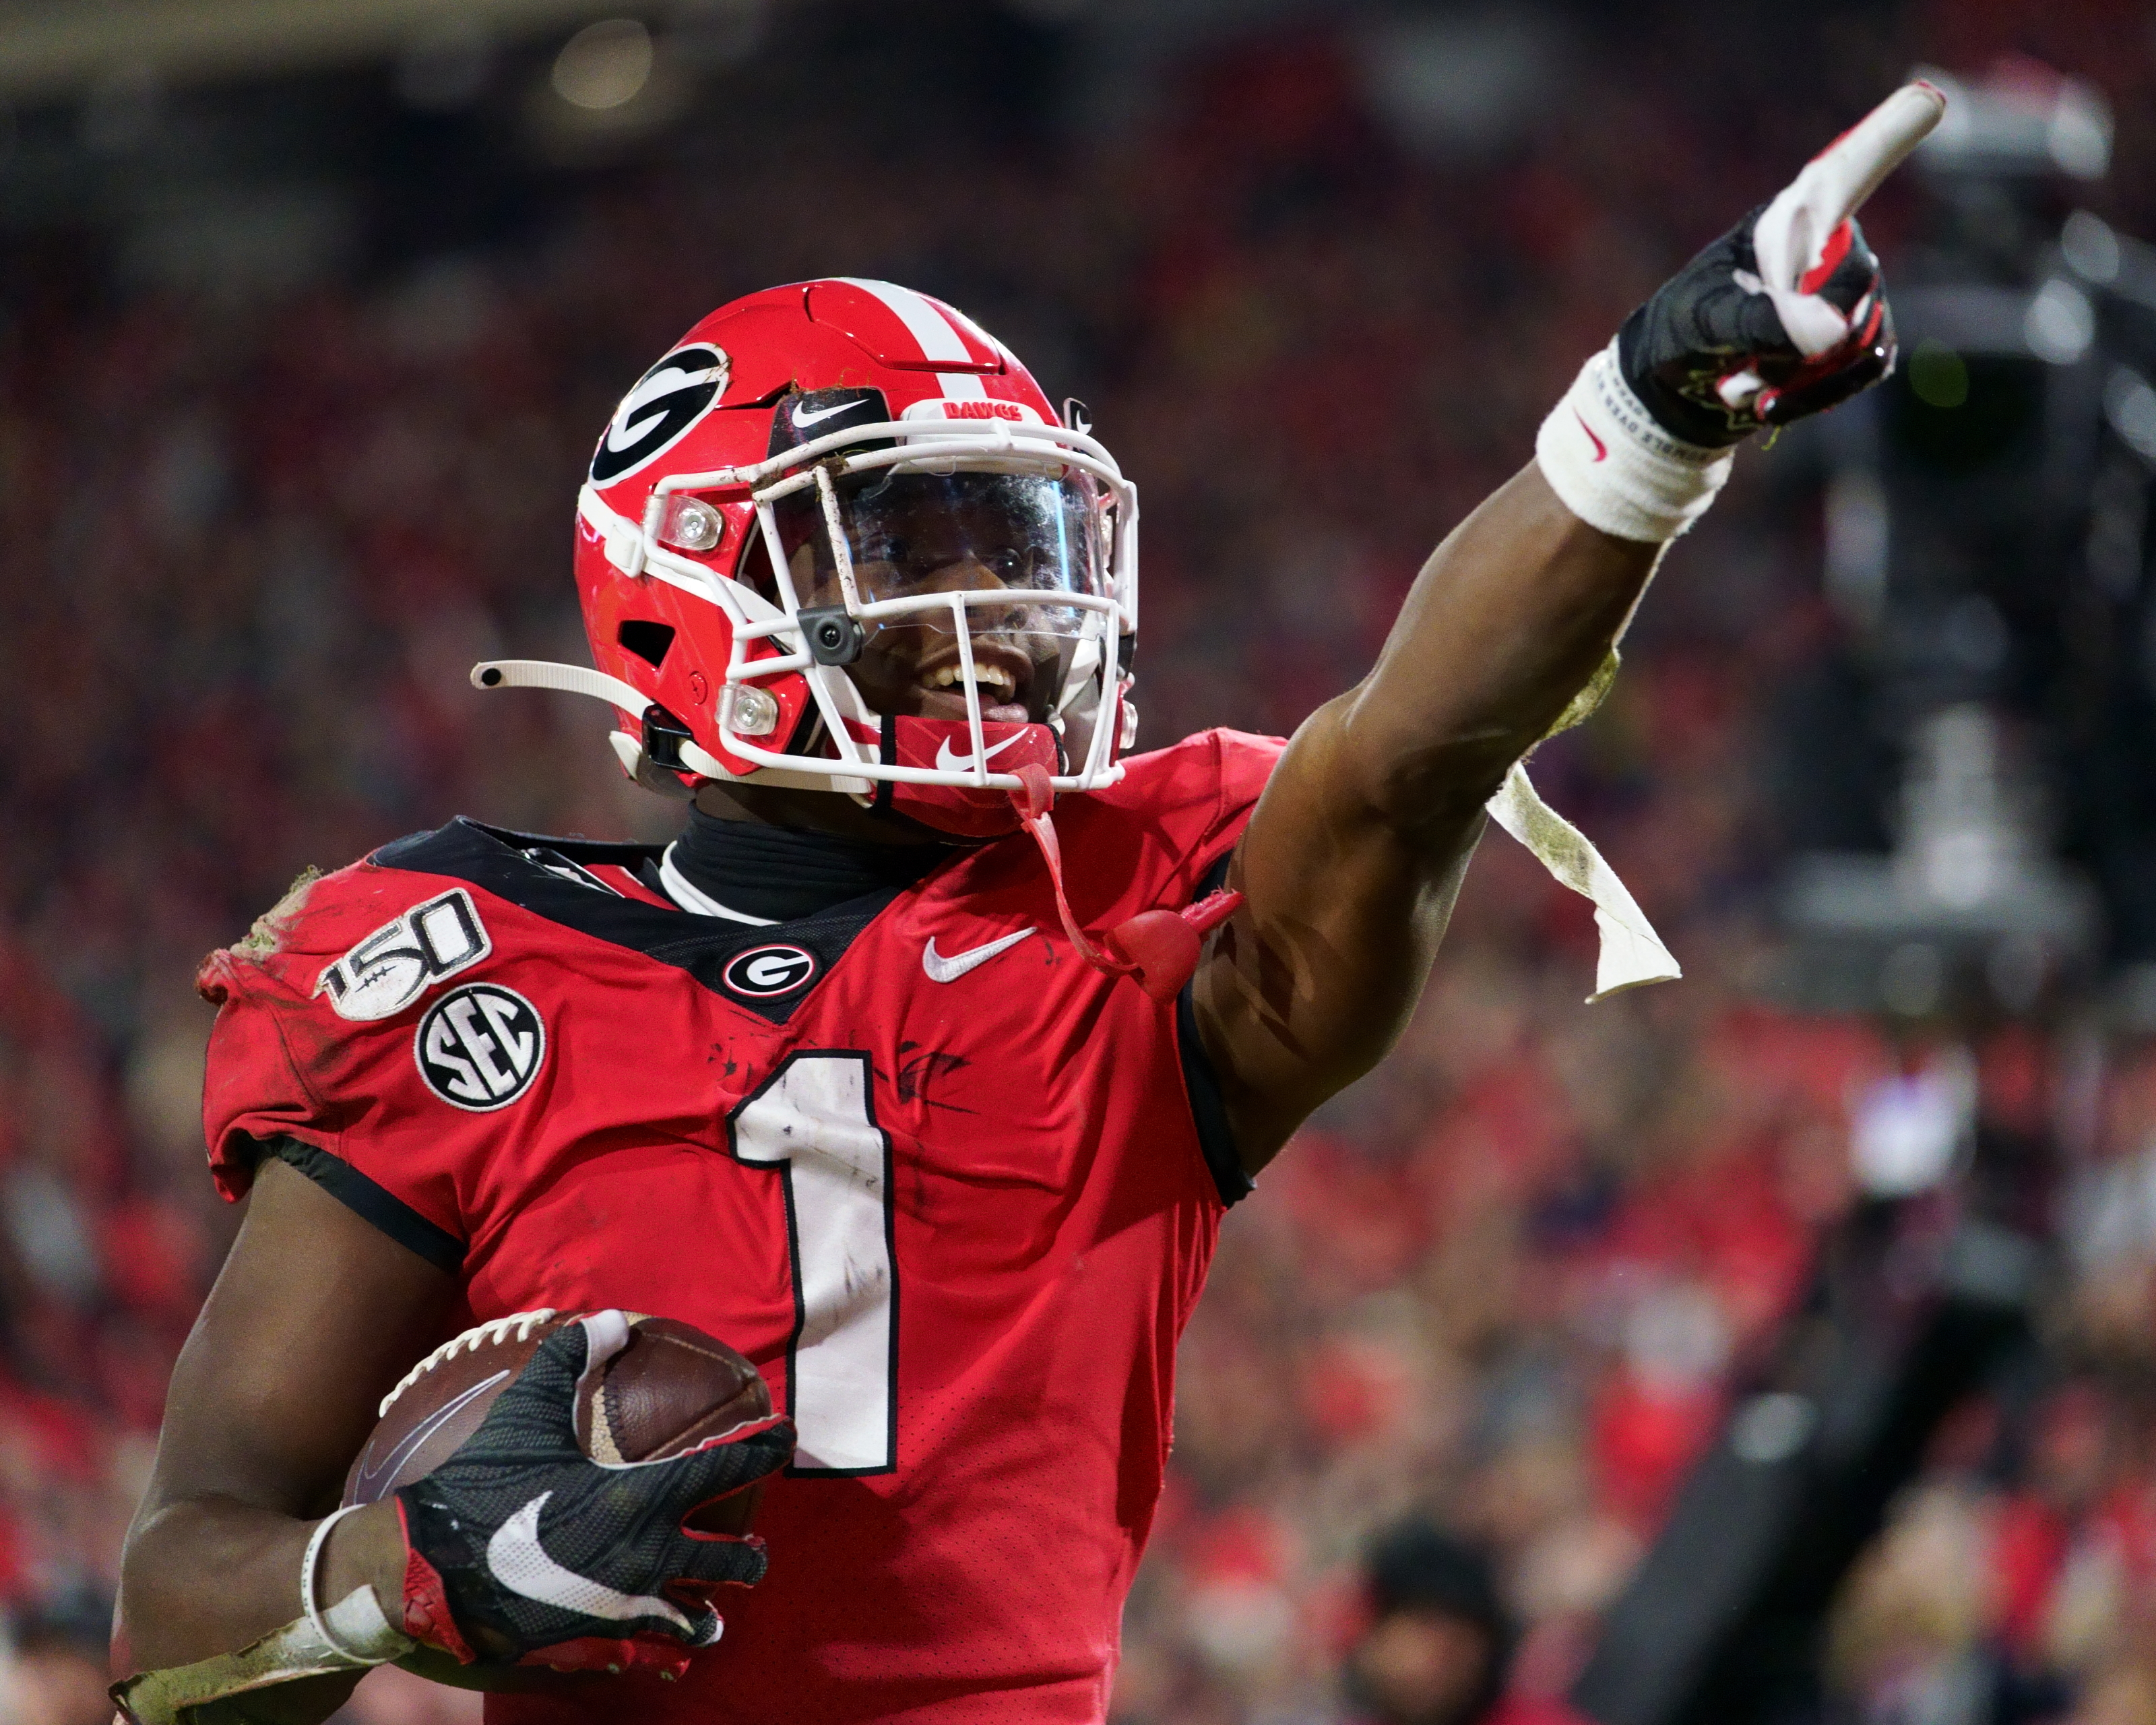 UGA football roster: George Pickens headlines group of talented wide receivers